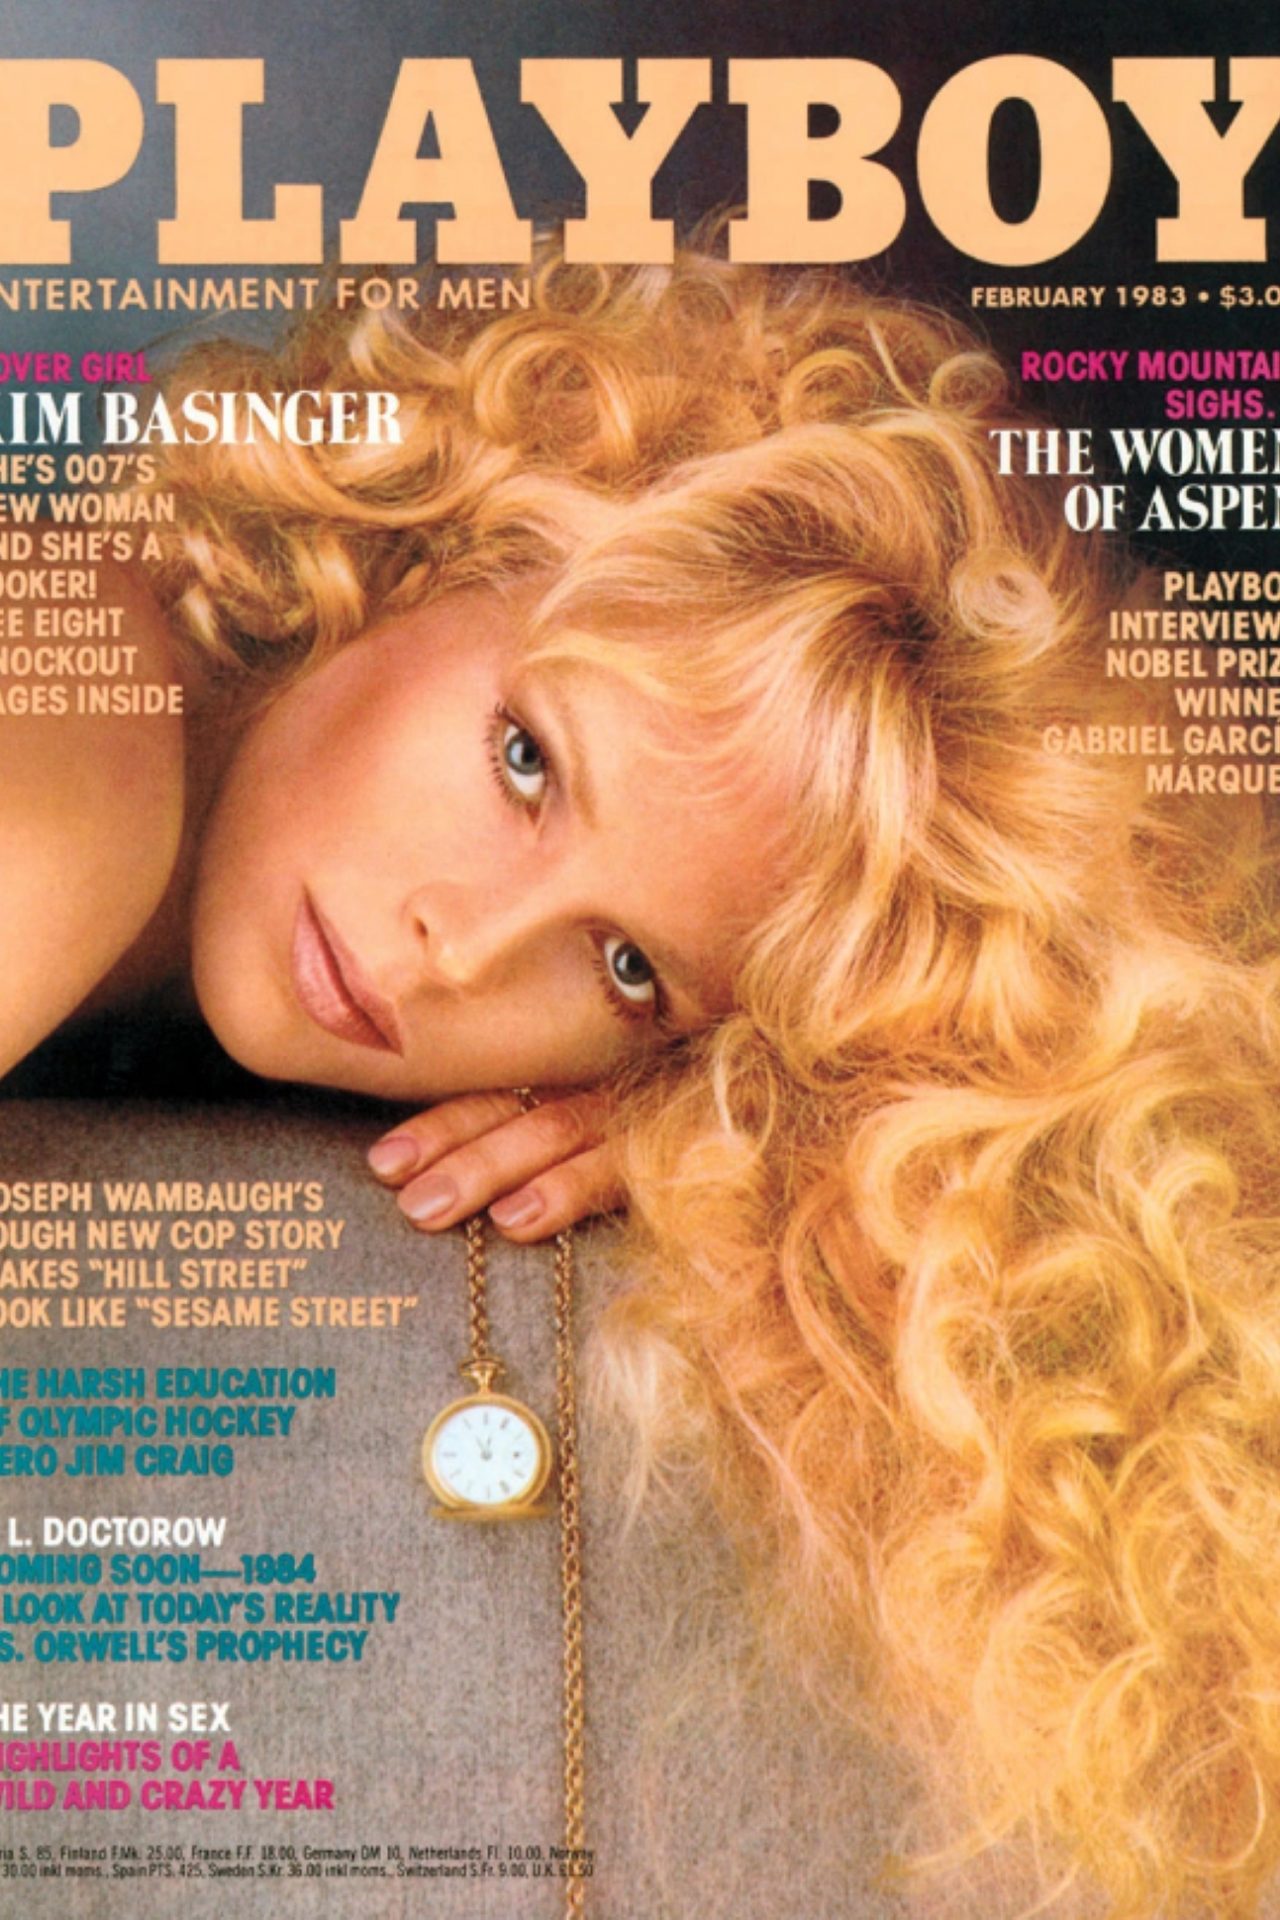 <p>Although she quit modeling, she did pose for P l a y boy in 1981. However, the shoot wasn’t released until 1983. In the end, Kim Basinger holds the distinction of being the only actress who has both posed without clothes for the famous magazine ánd won an Academy Award.</p> <p>Image: P l a y boy, Feb. 1983</p>